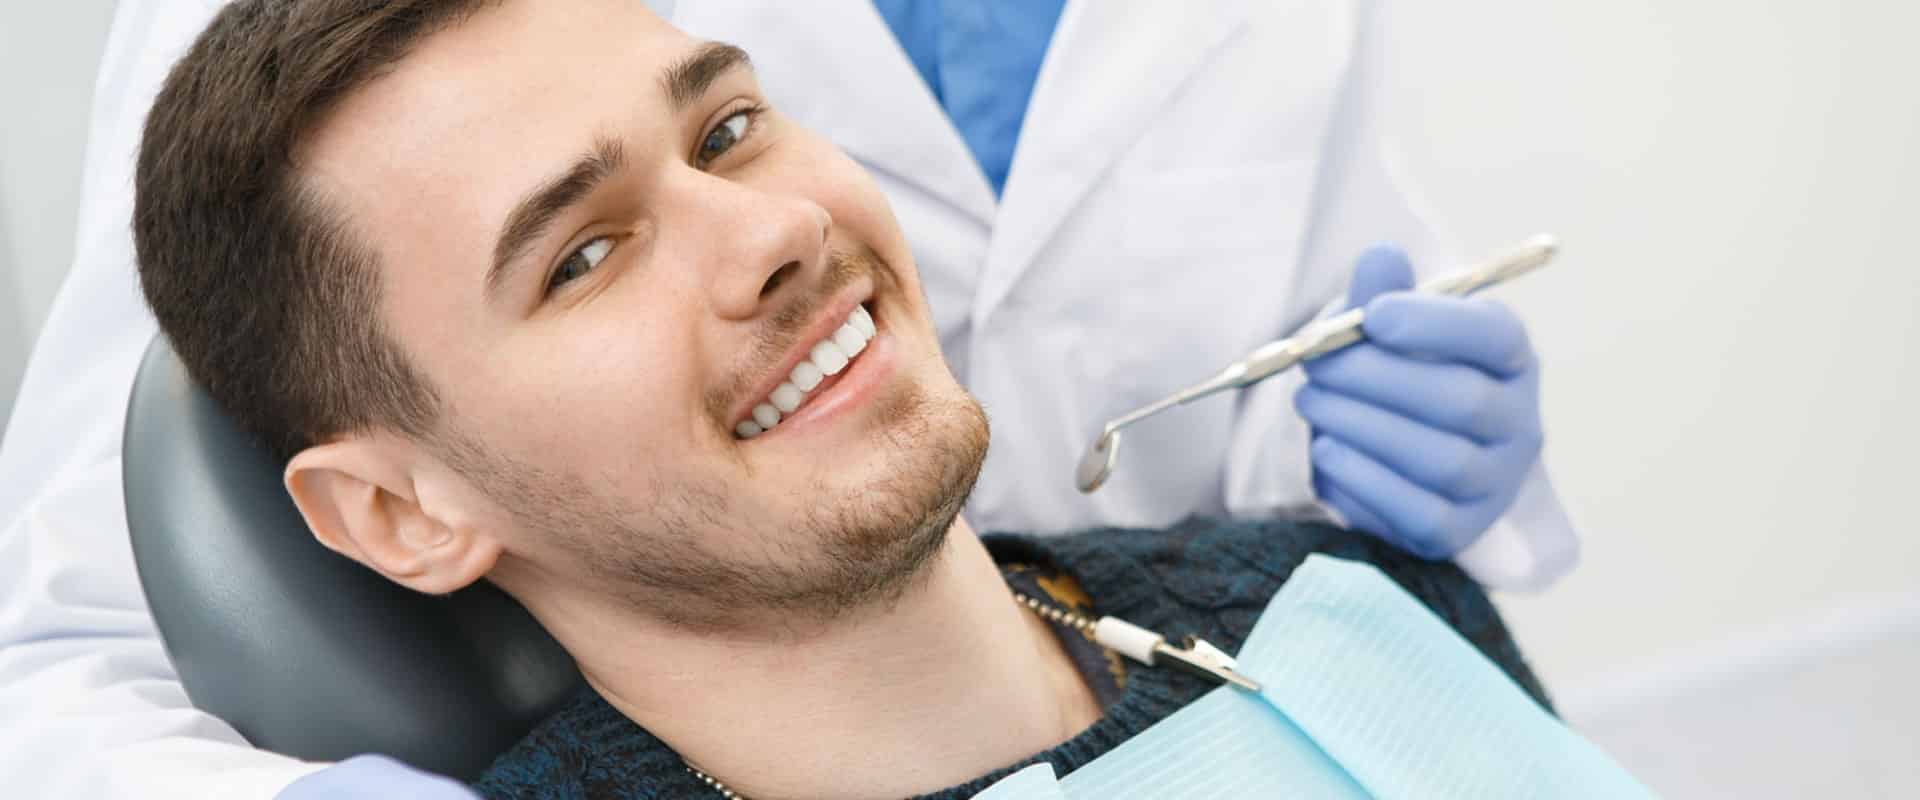 A patient feeling calm and relaxed during a dental procedure.